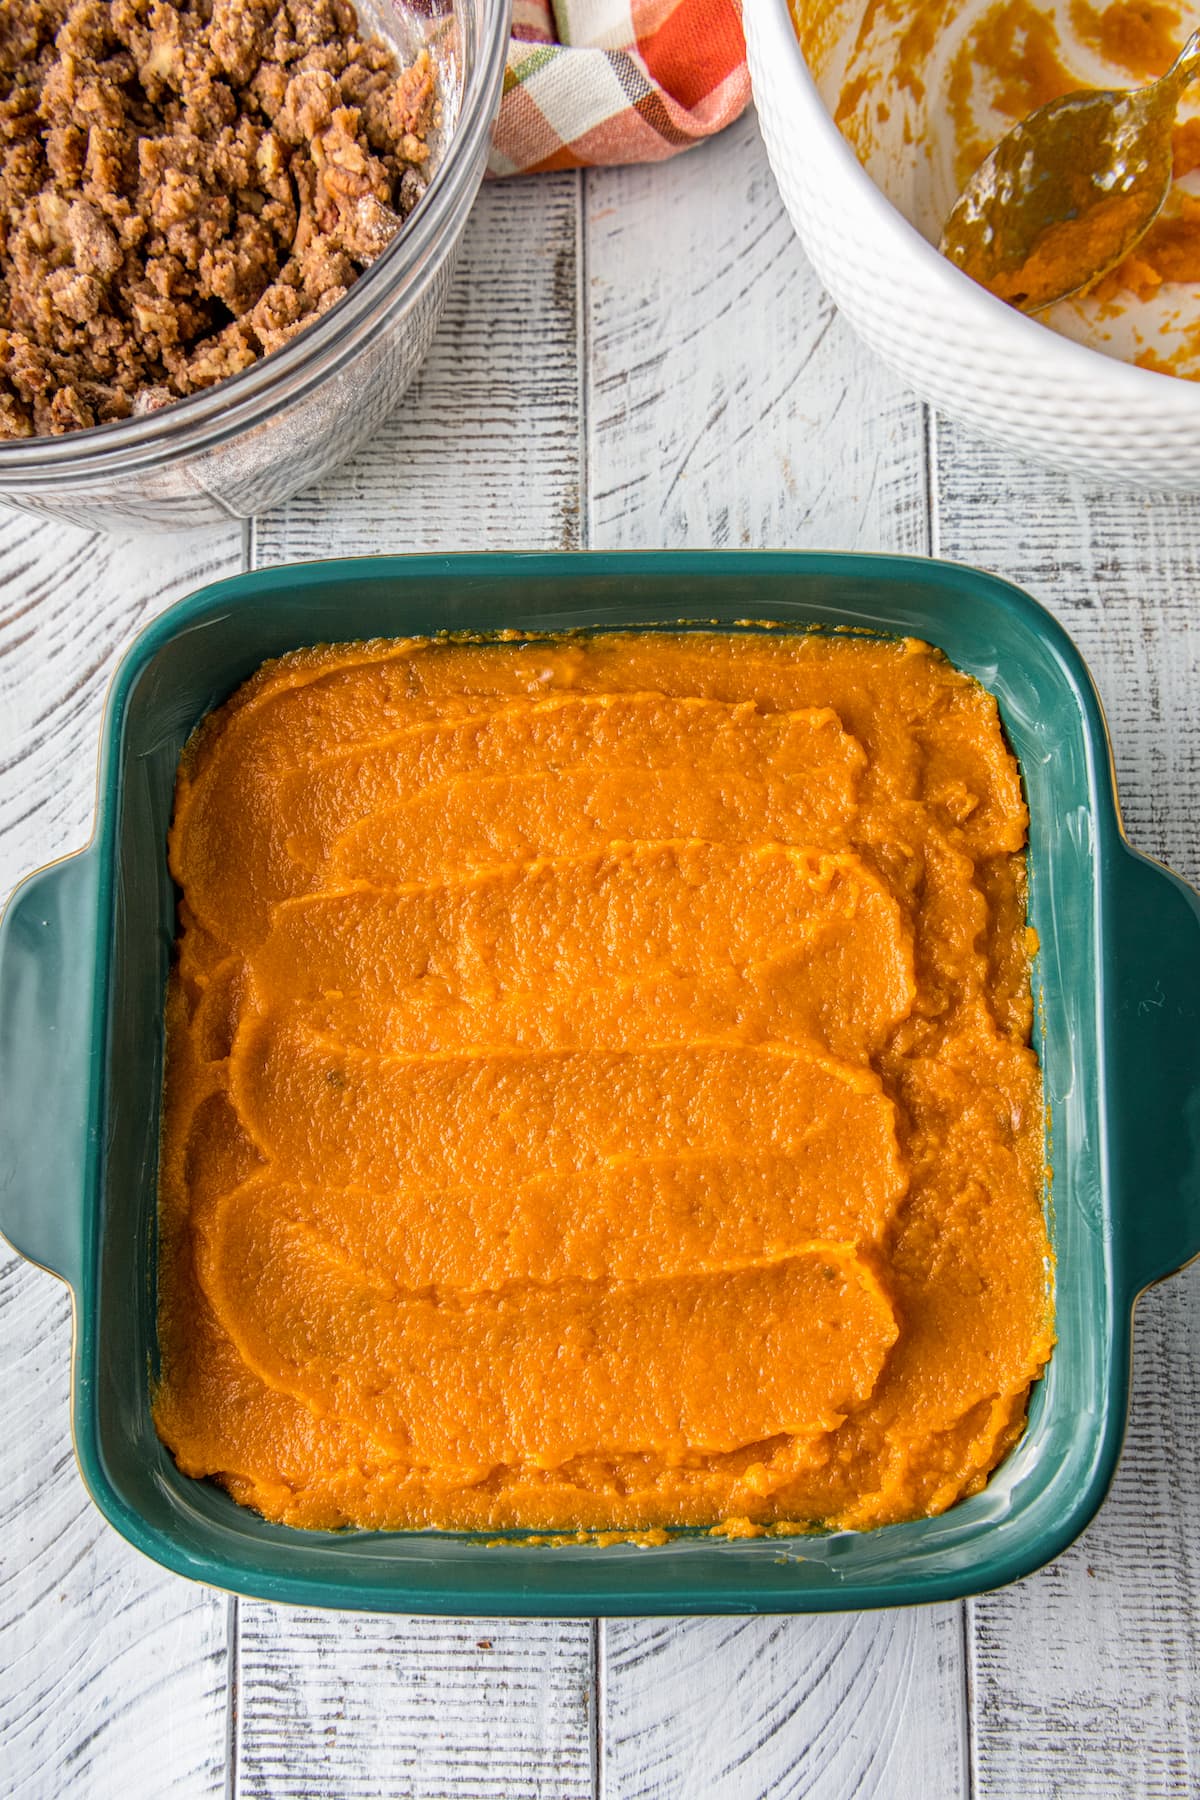 pureed sweet potatoes in a teal casserole dish